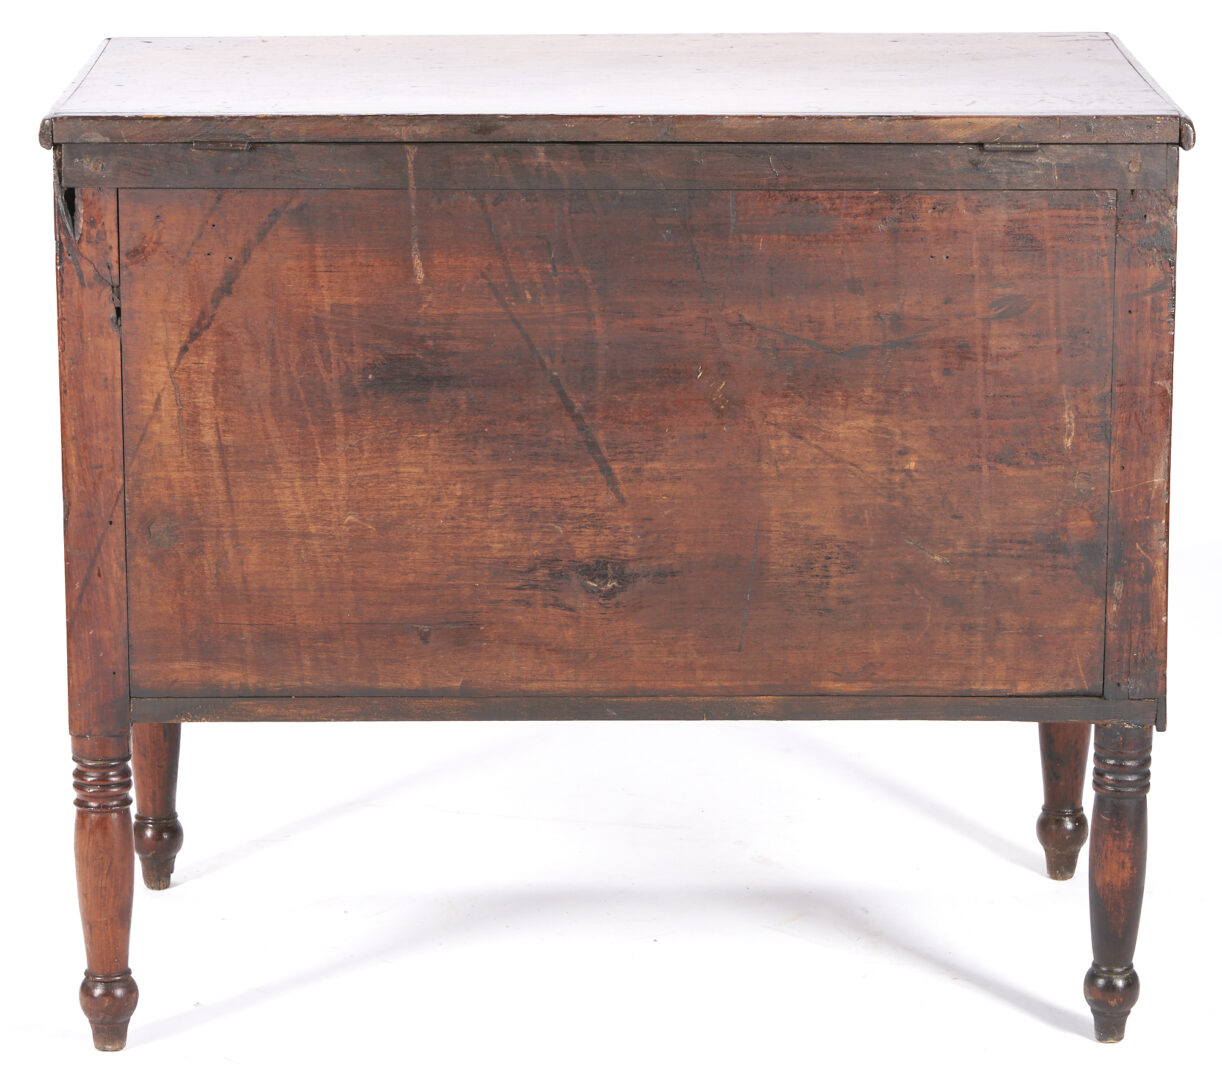 Lot 414: Southern Cherry Sugar Chest, Likely Kentucky